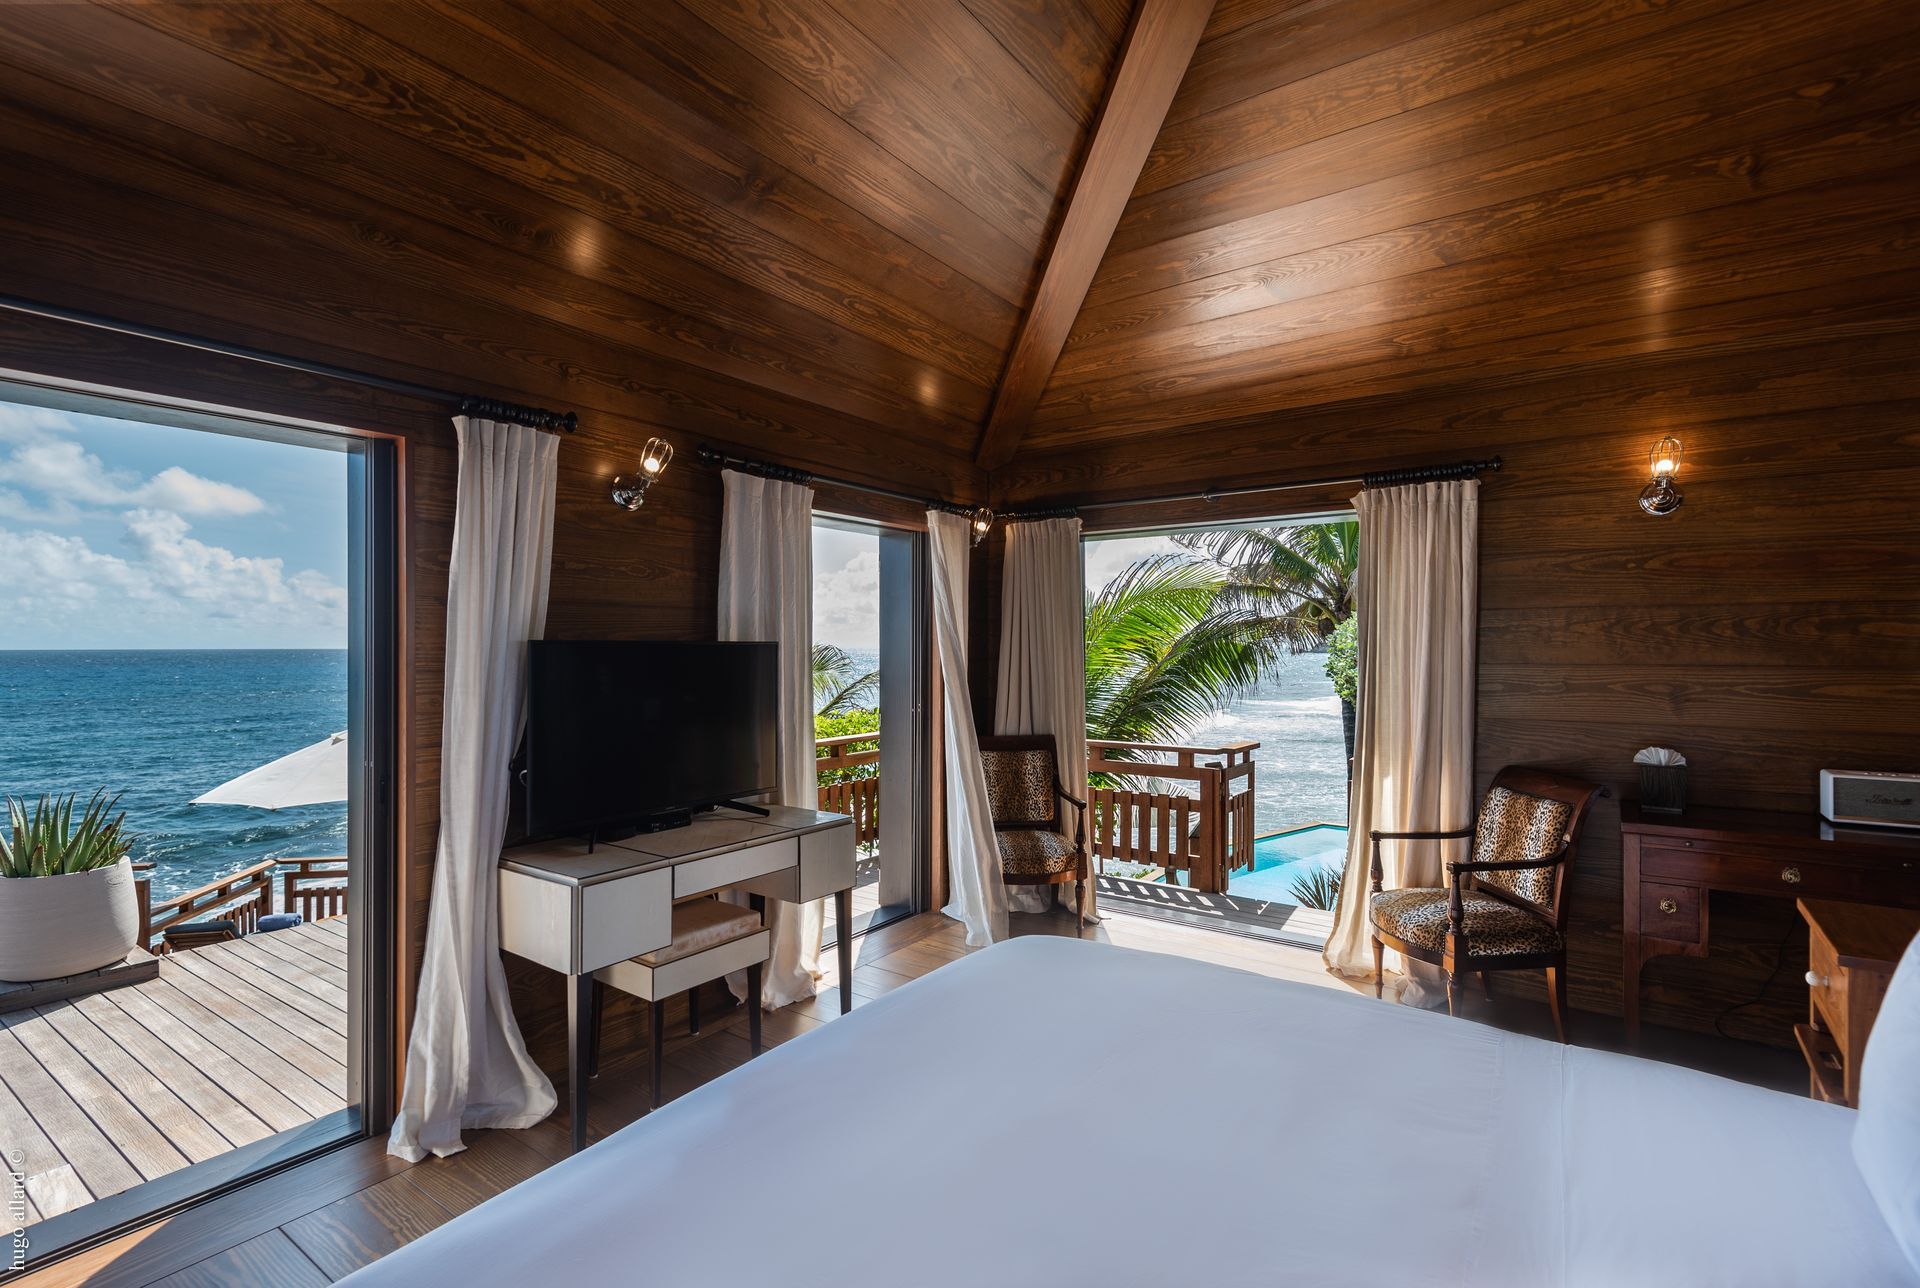 a hotel room with a bed, television, chairs and a view of the ocean